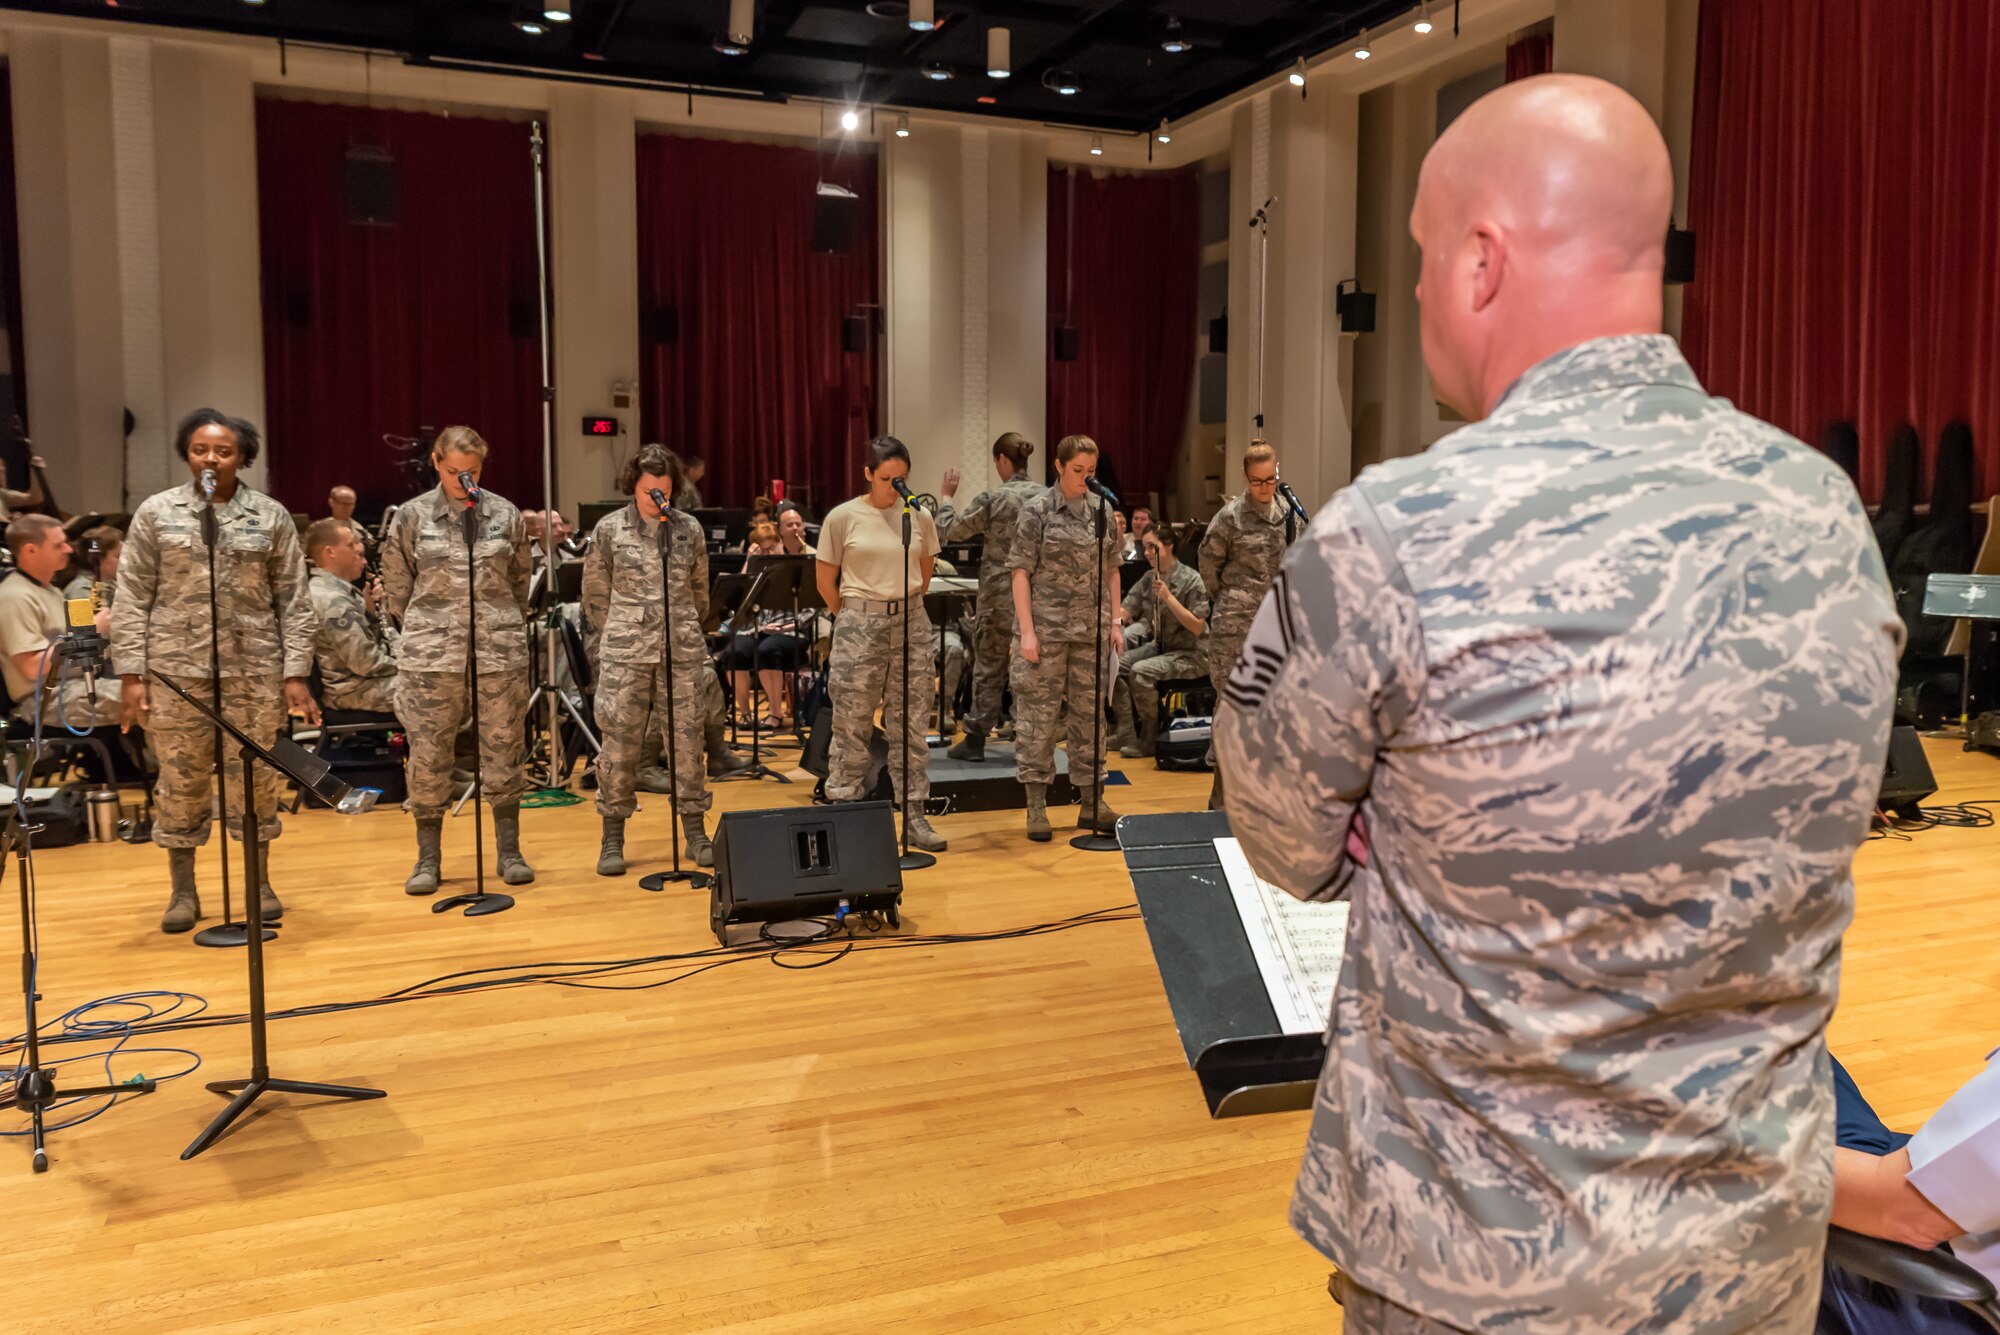 Members from the Singing Sergeants rehearse with the Concert Band while Non Commissioned Officer in Charge Senior Master Sgt. observes